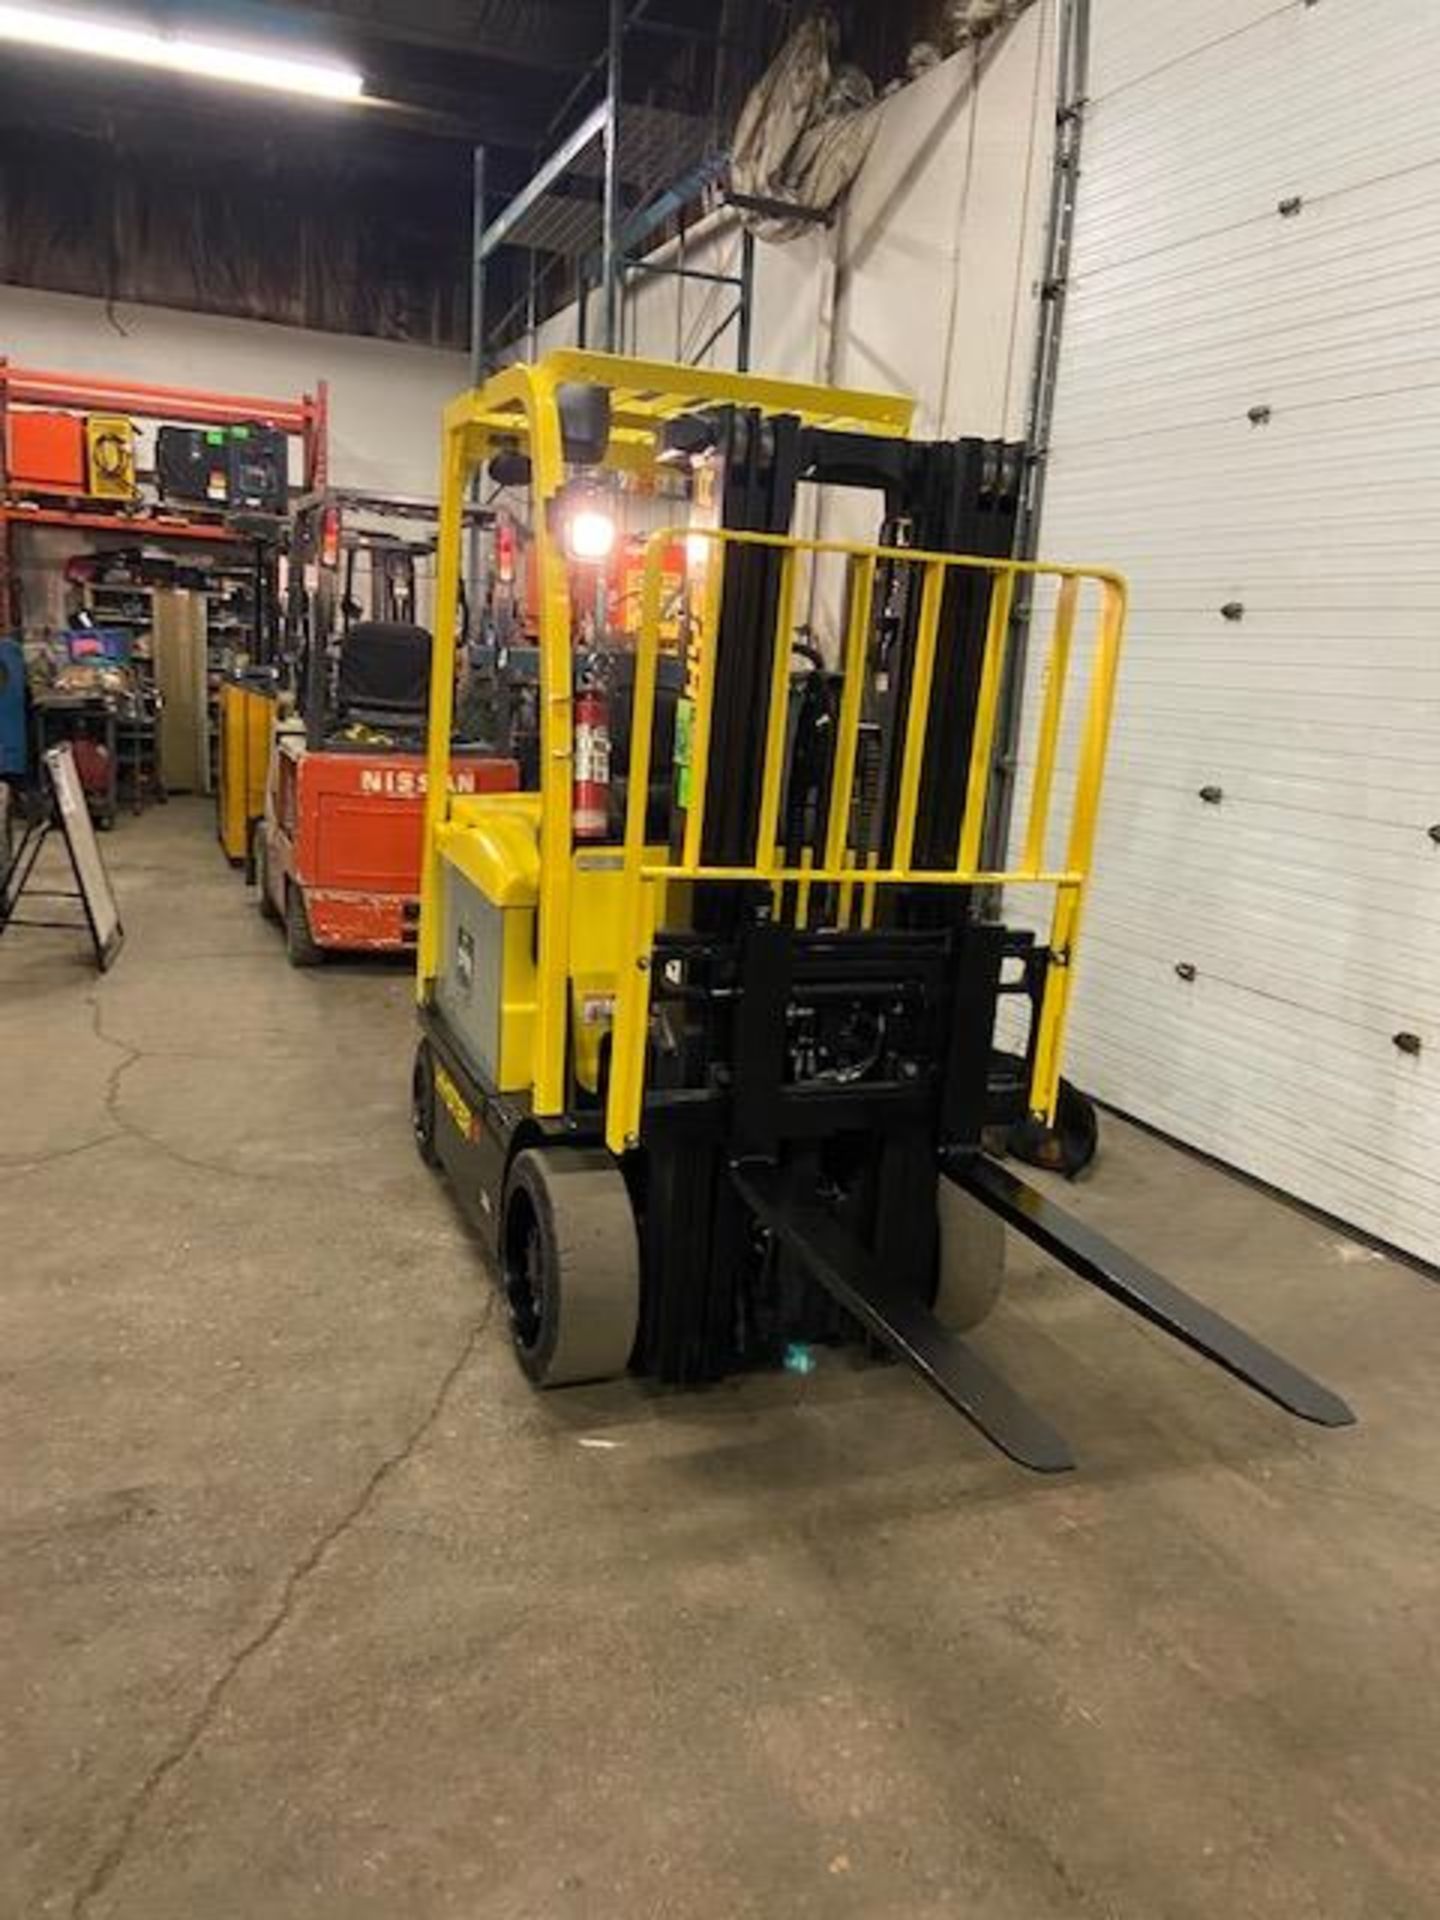 FREE CUSTOMS - 2012 Hyster 5000lbs Capacity Forklift Electric with 3-STAGE MAST with sideshift and - Image 2 of 3